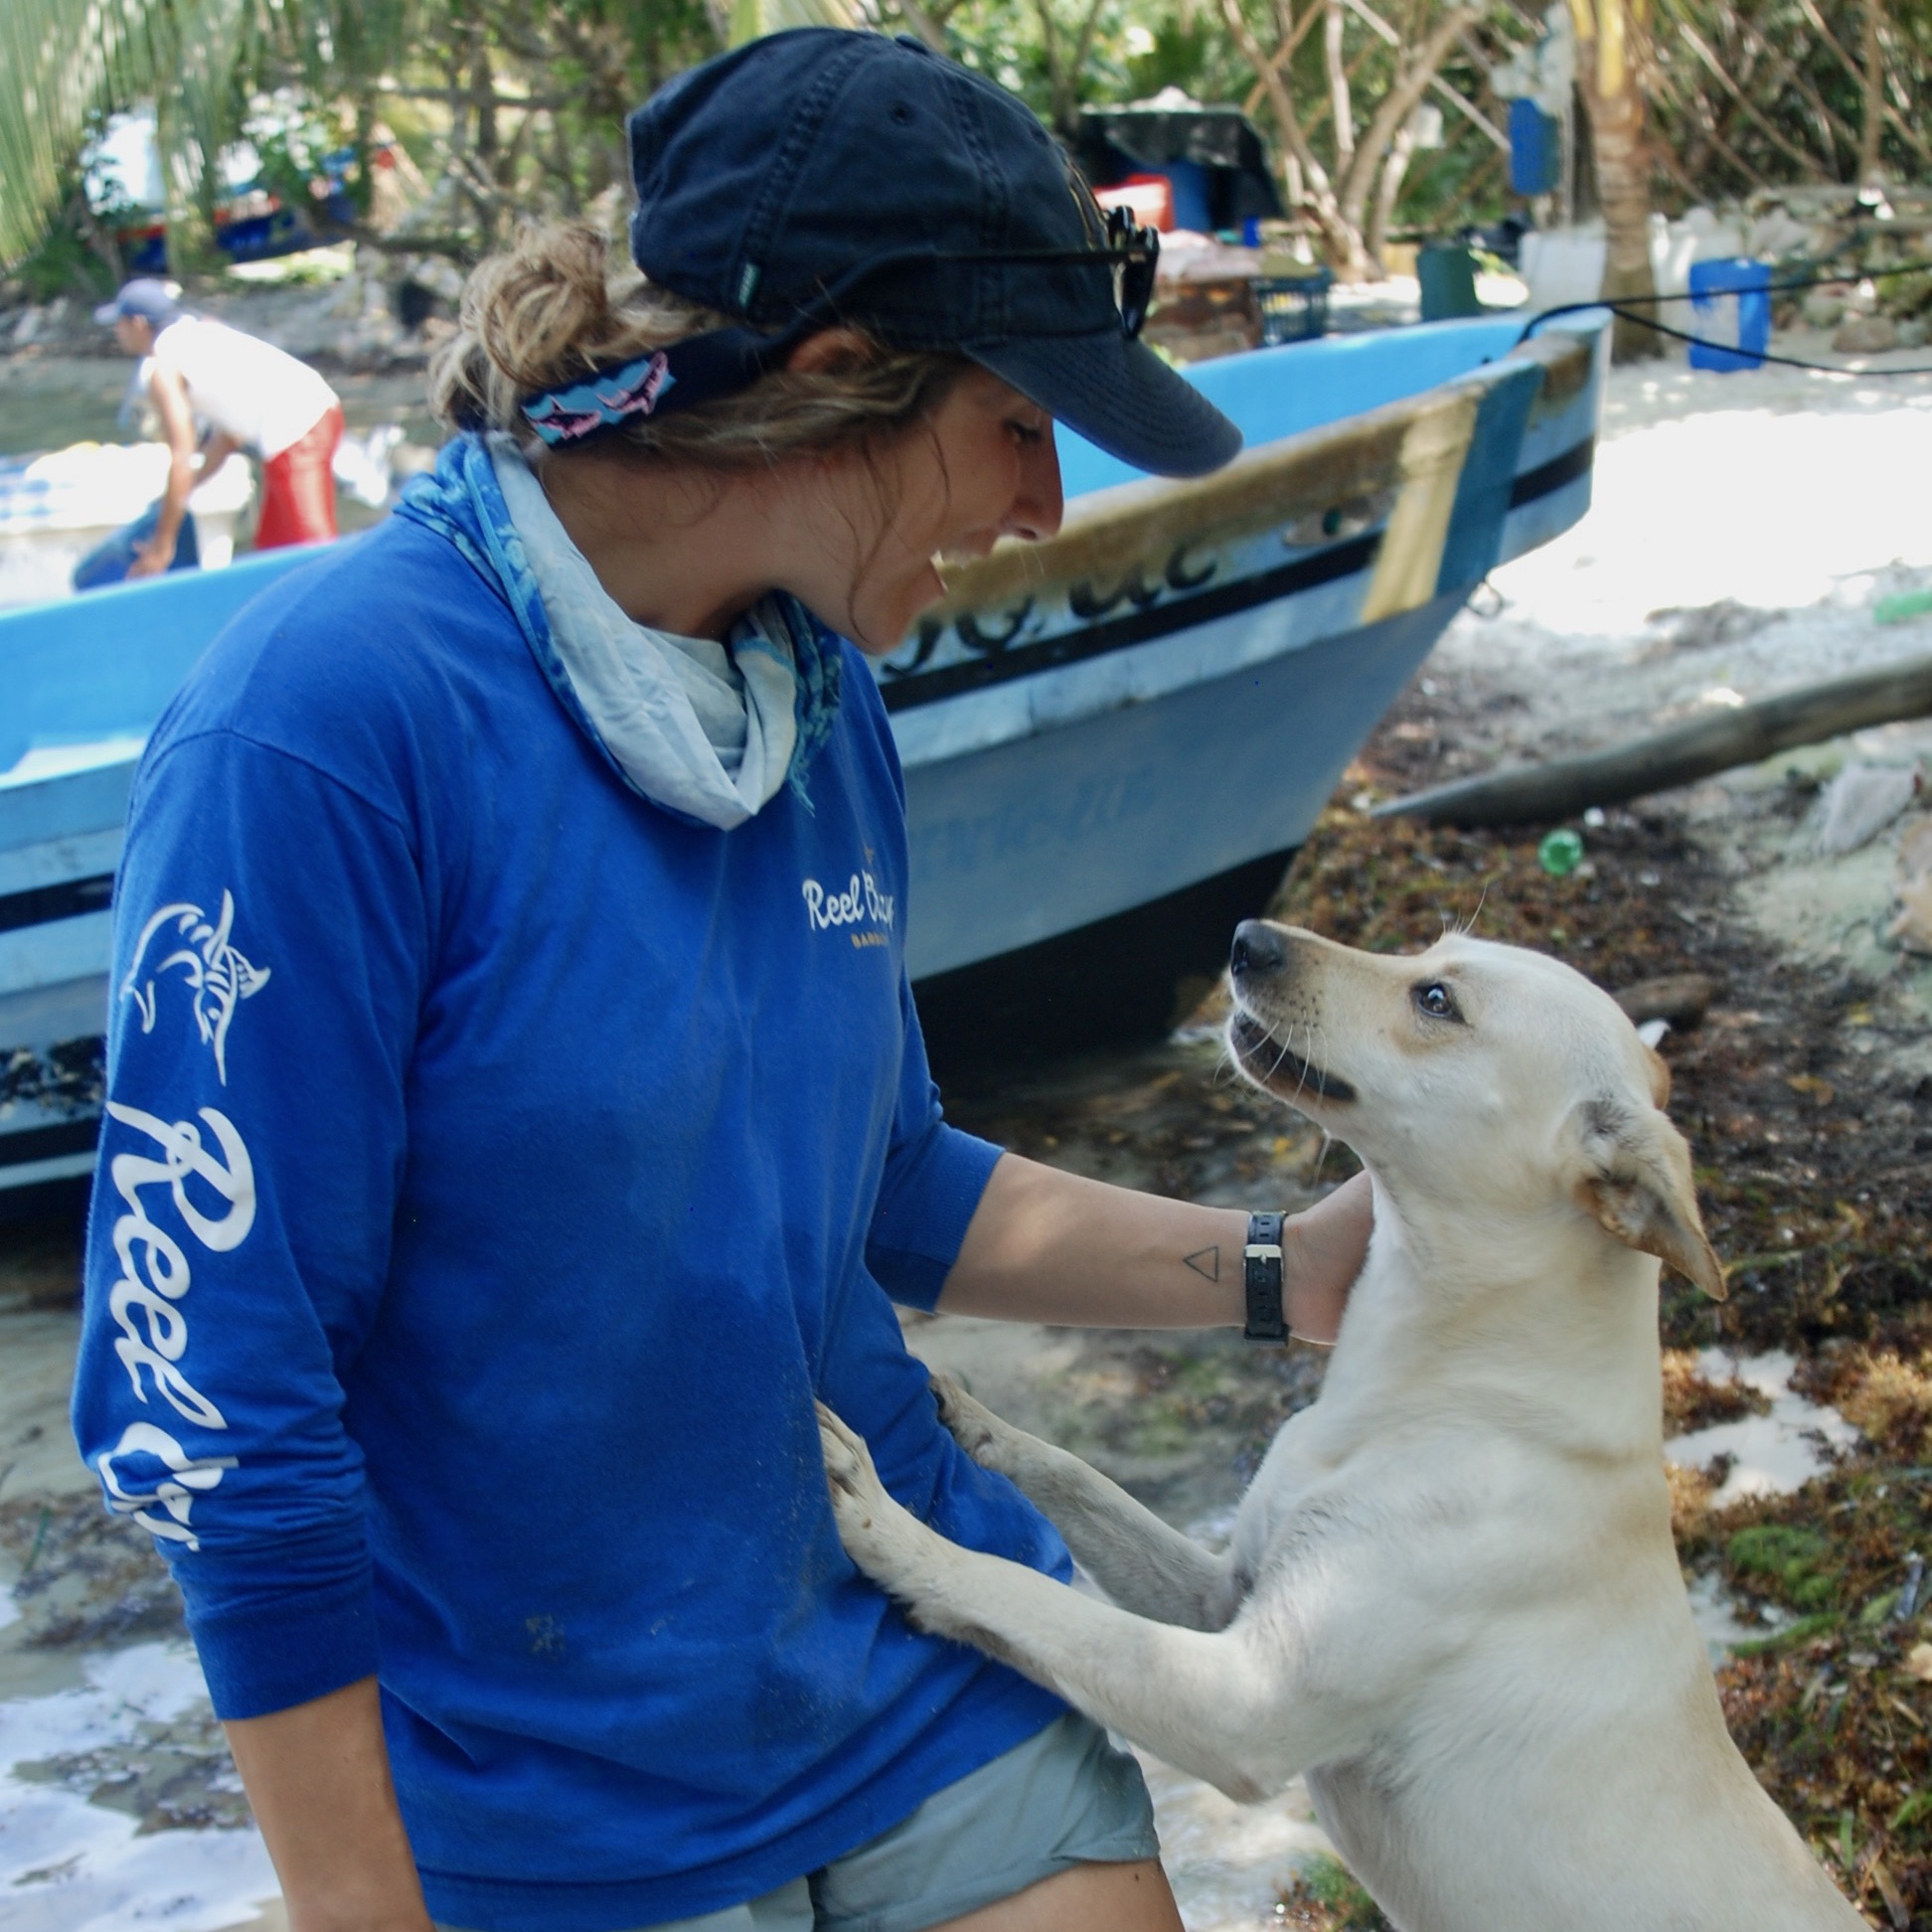 Here I am getting acquainted with some island dogs while visiting a shark landing site in southern Belize. This was part of Jessica Quinlan’s research to assess species composition of the commercial shark fishery in Belize. PC: Jessica Quinlan